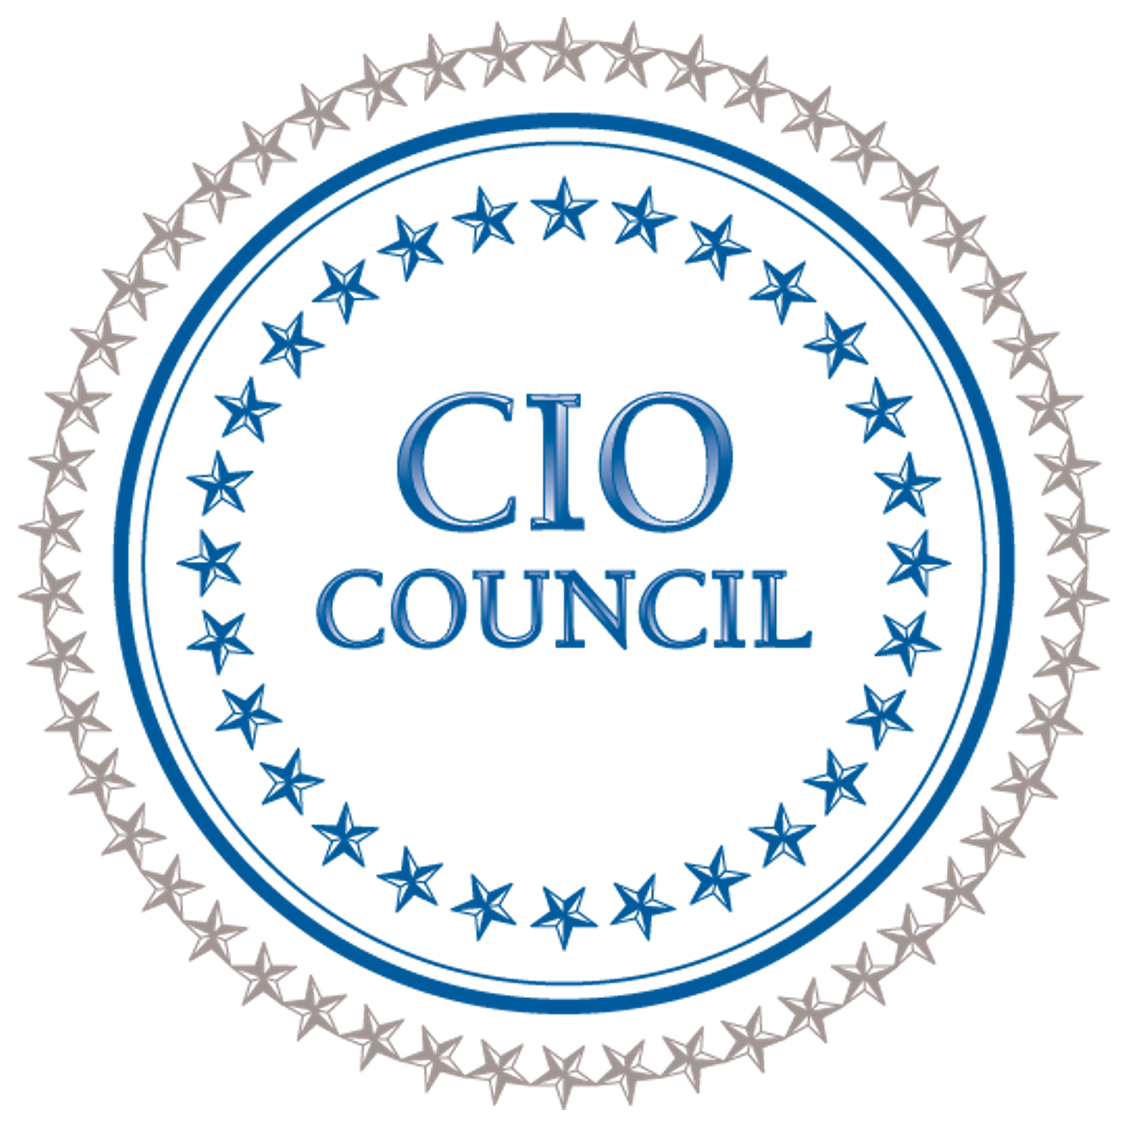 Chief Information Officers Council logo agency seal